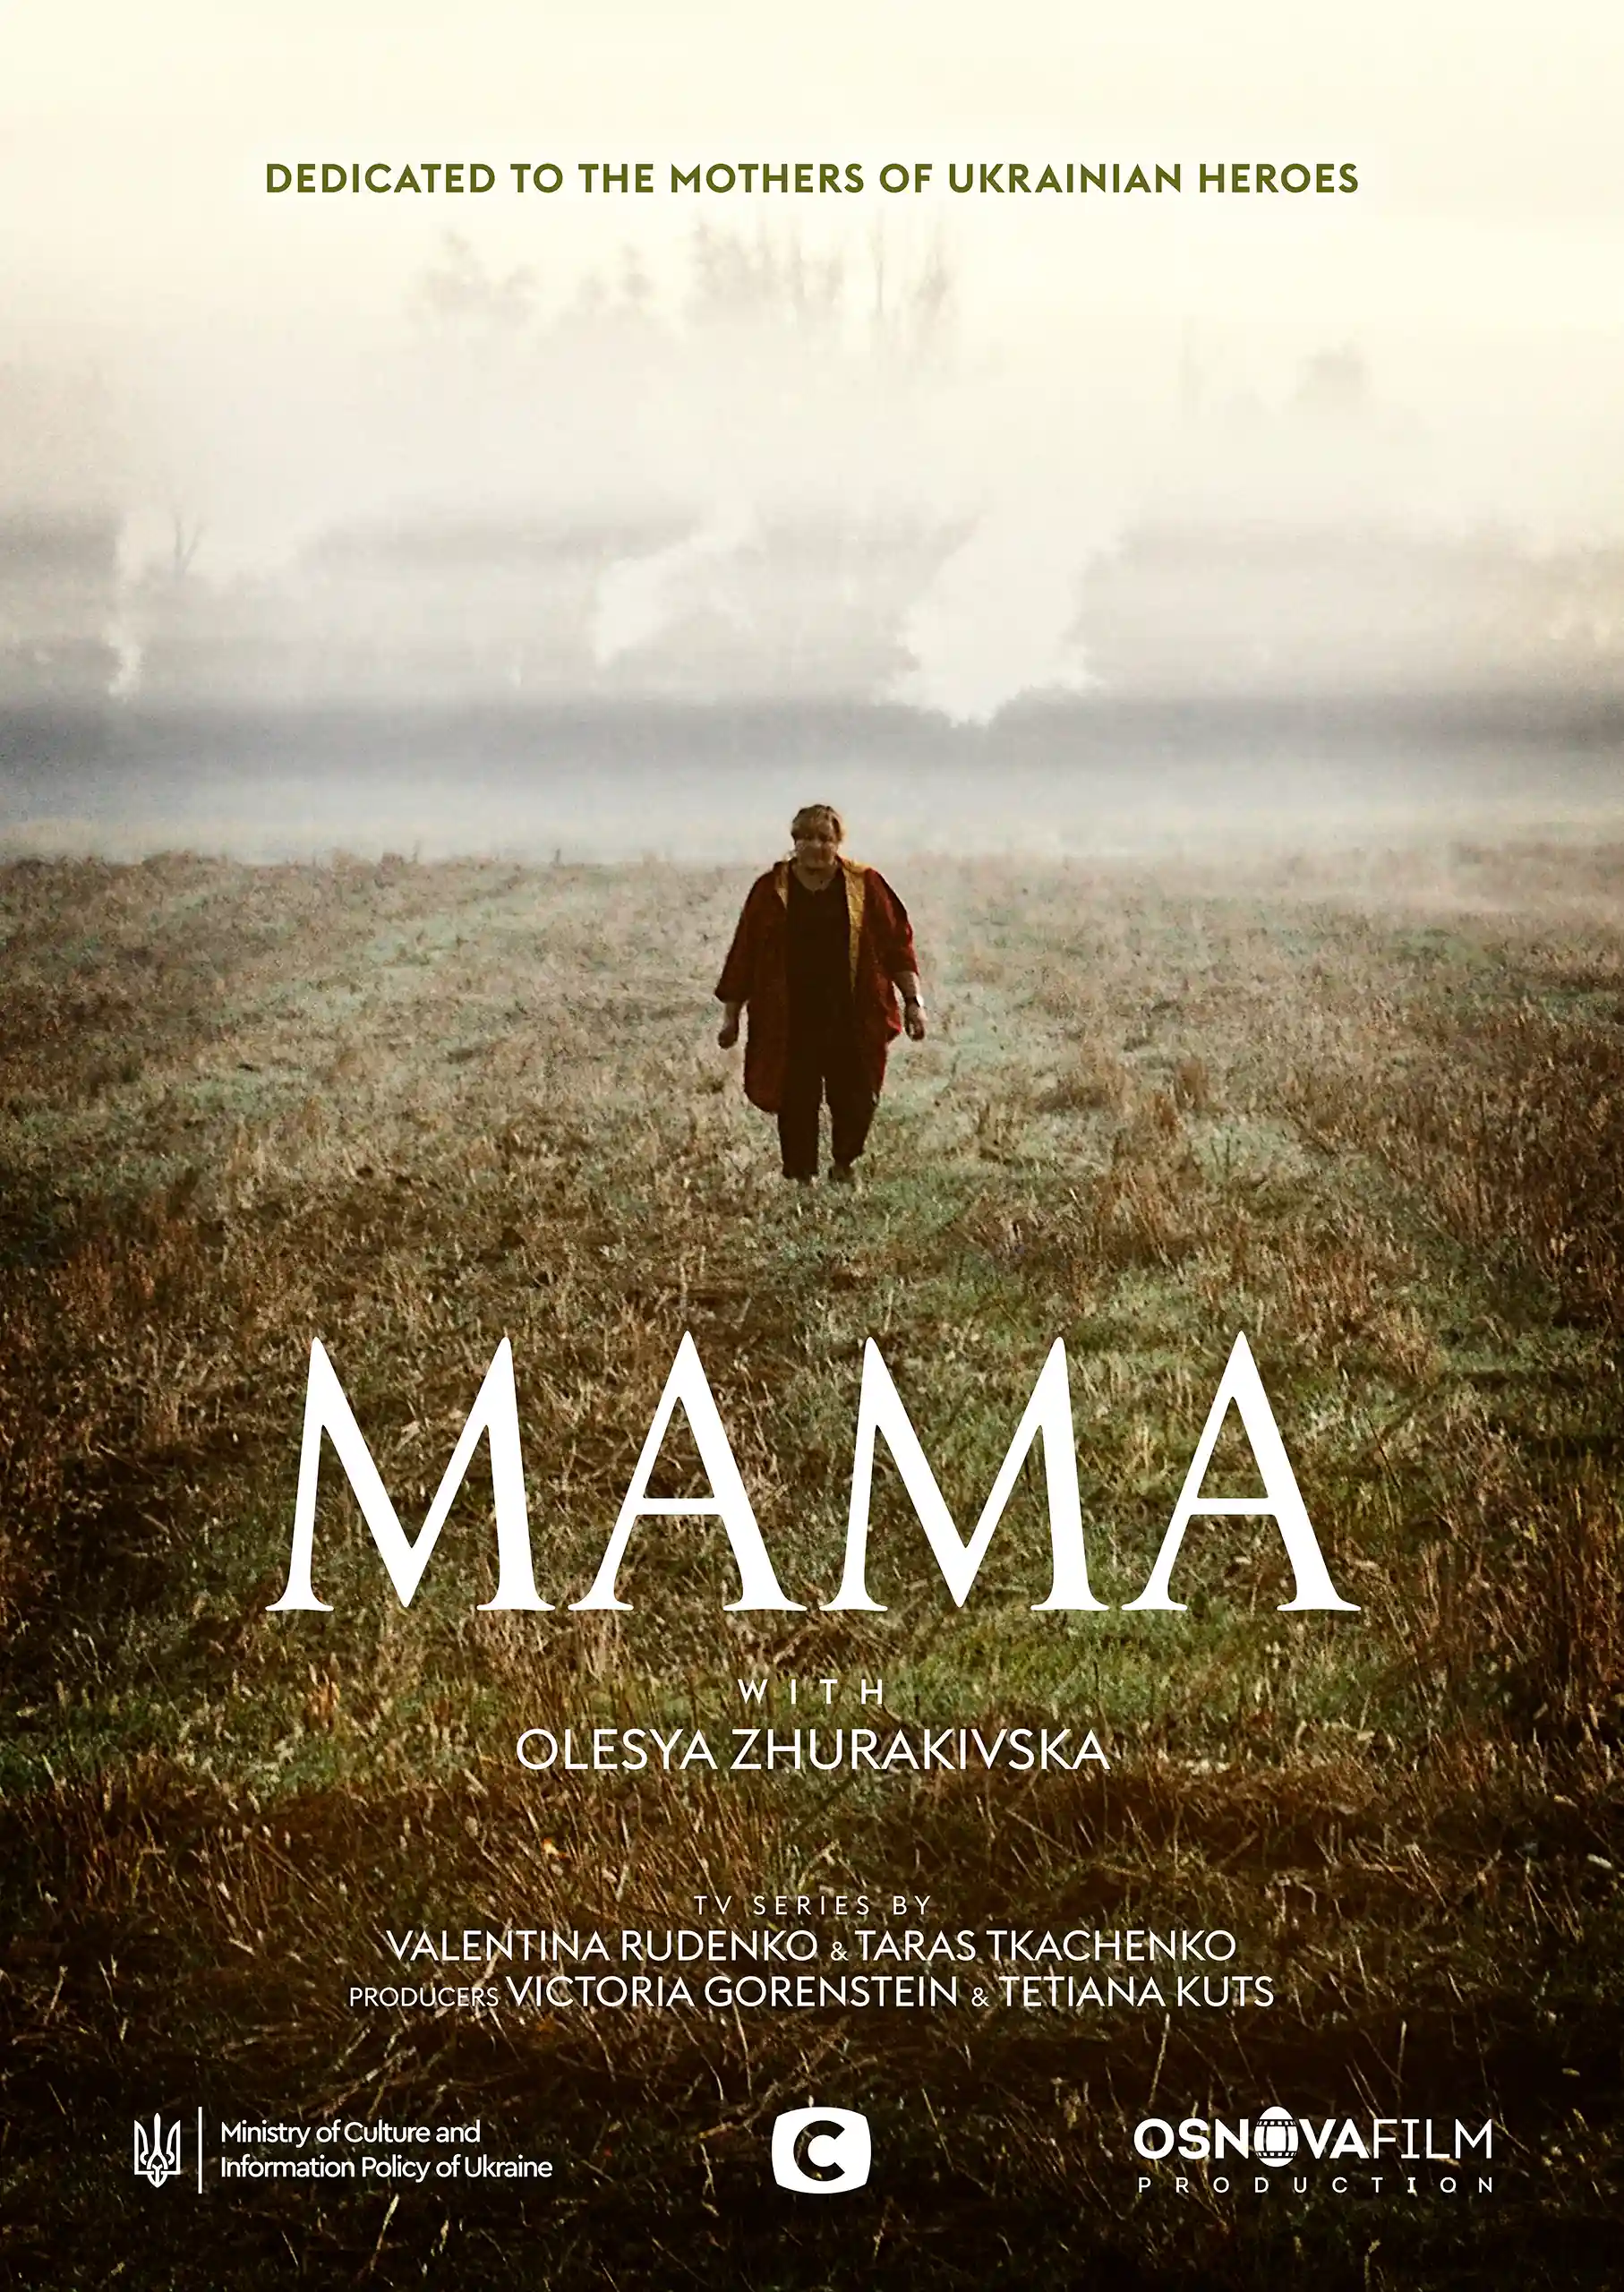 A movie poster featuring a woman walking alone in a desolate field with fog in the background. Text on the poster reads 'MAMA' in large white letters, with a dedication to the mothers of Ukrainian heroes at the top.